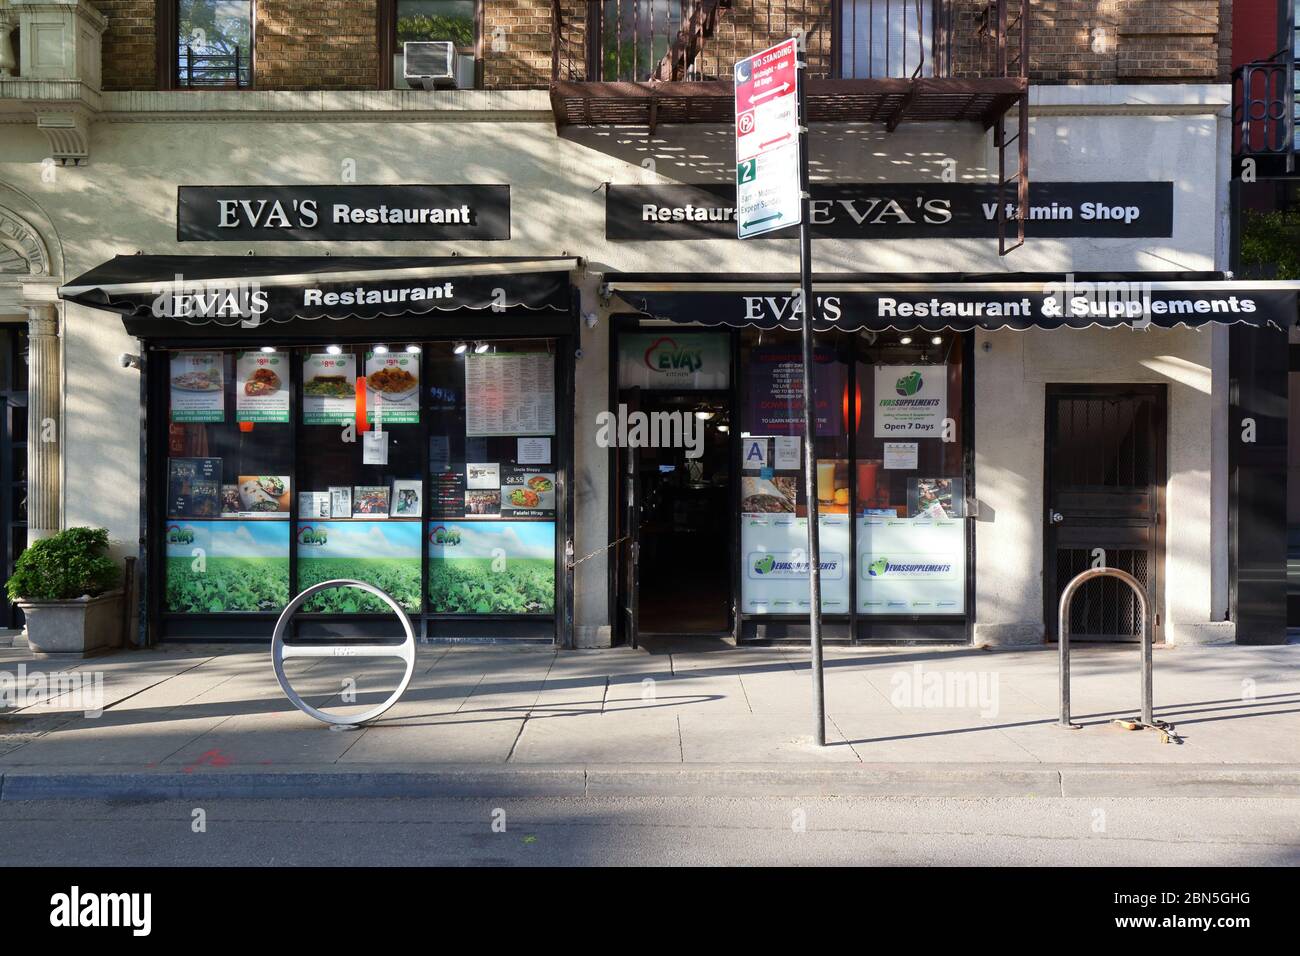 Eva's Kitchen, 11 West 8th Street, New York, NY. exterior storefront of a health food restaurant in the Greenwich Village neighborhood of Manhattan. Stock Photo